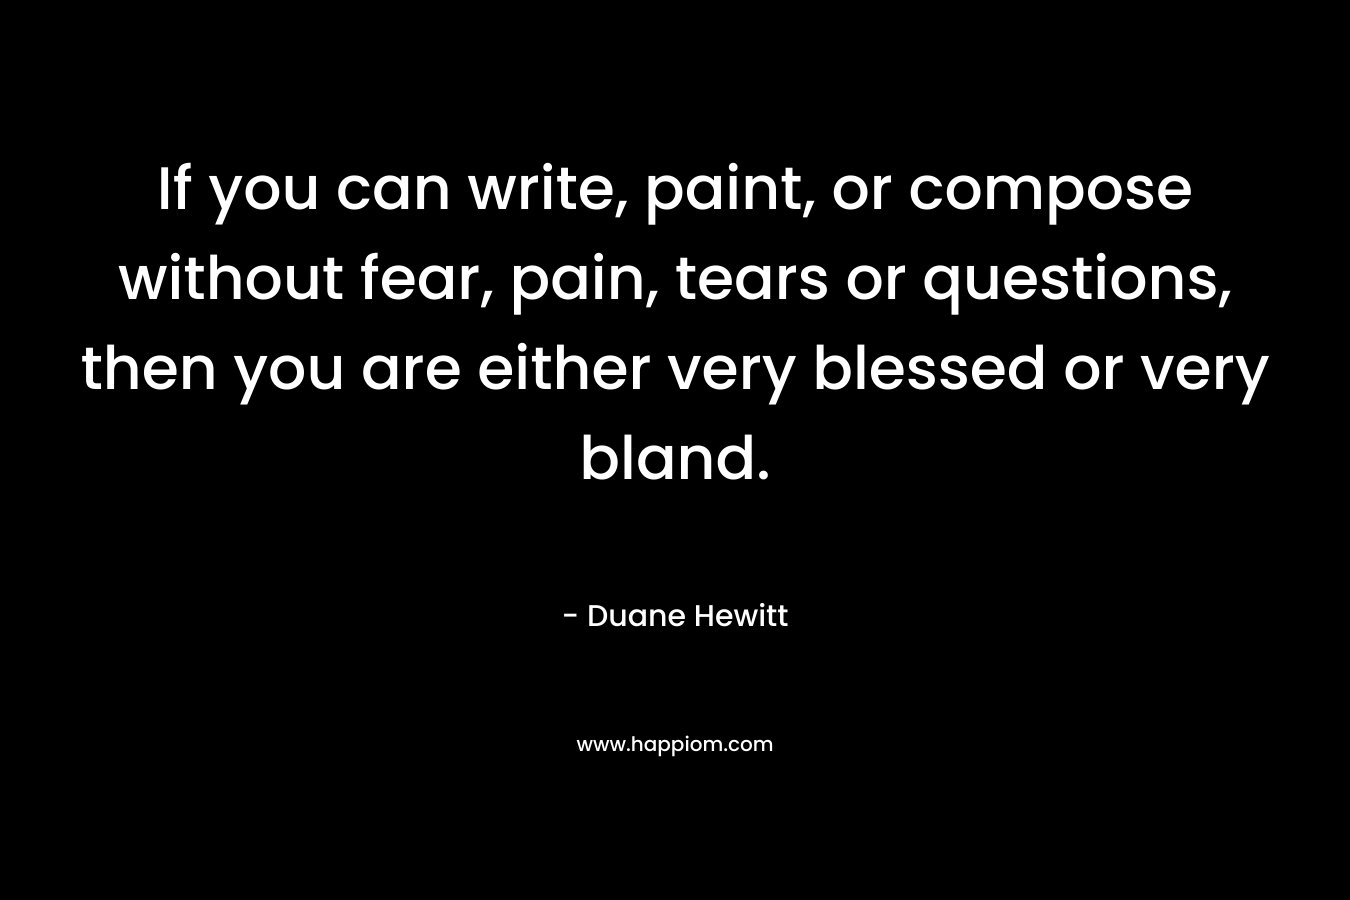 If you can write, paint, or compose without fear, pain, tears or questions, then you are either very blessed or very bland.